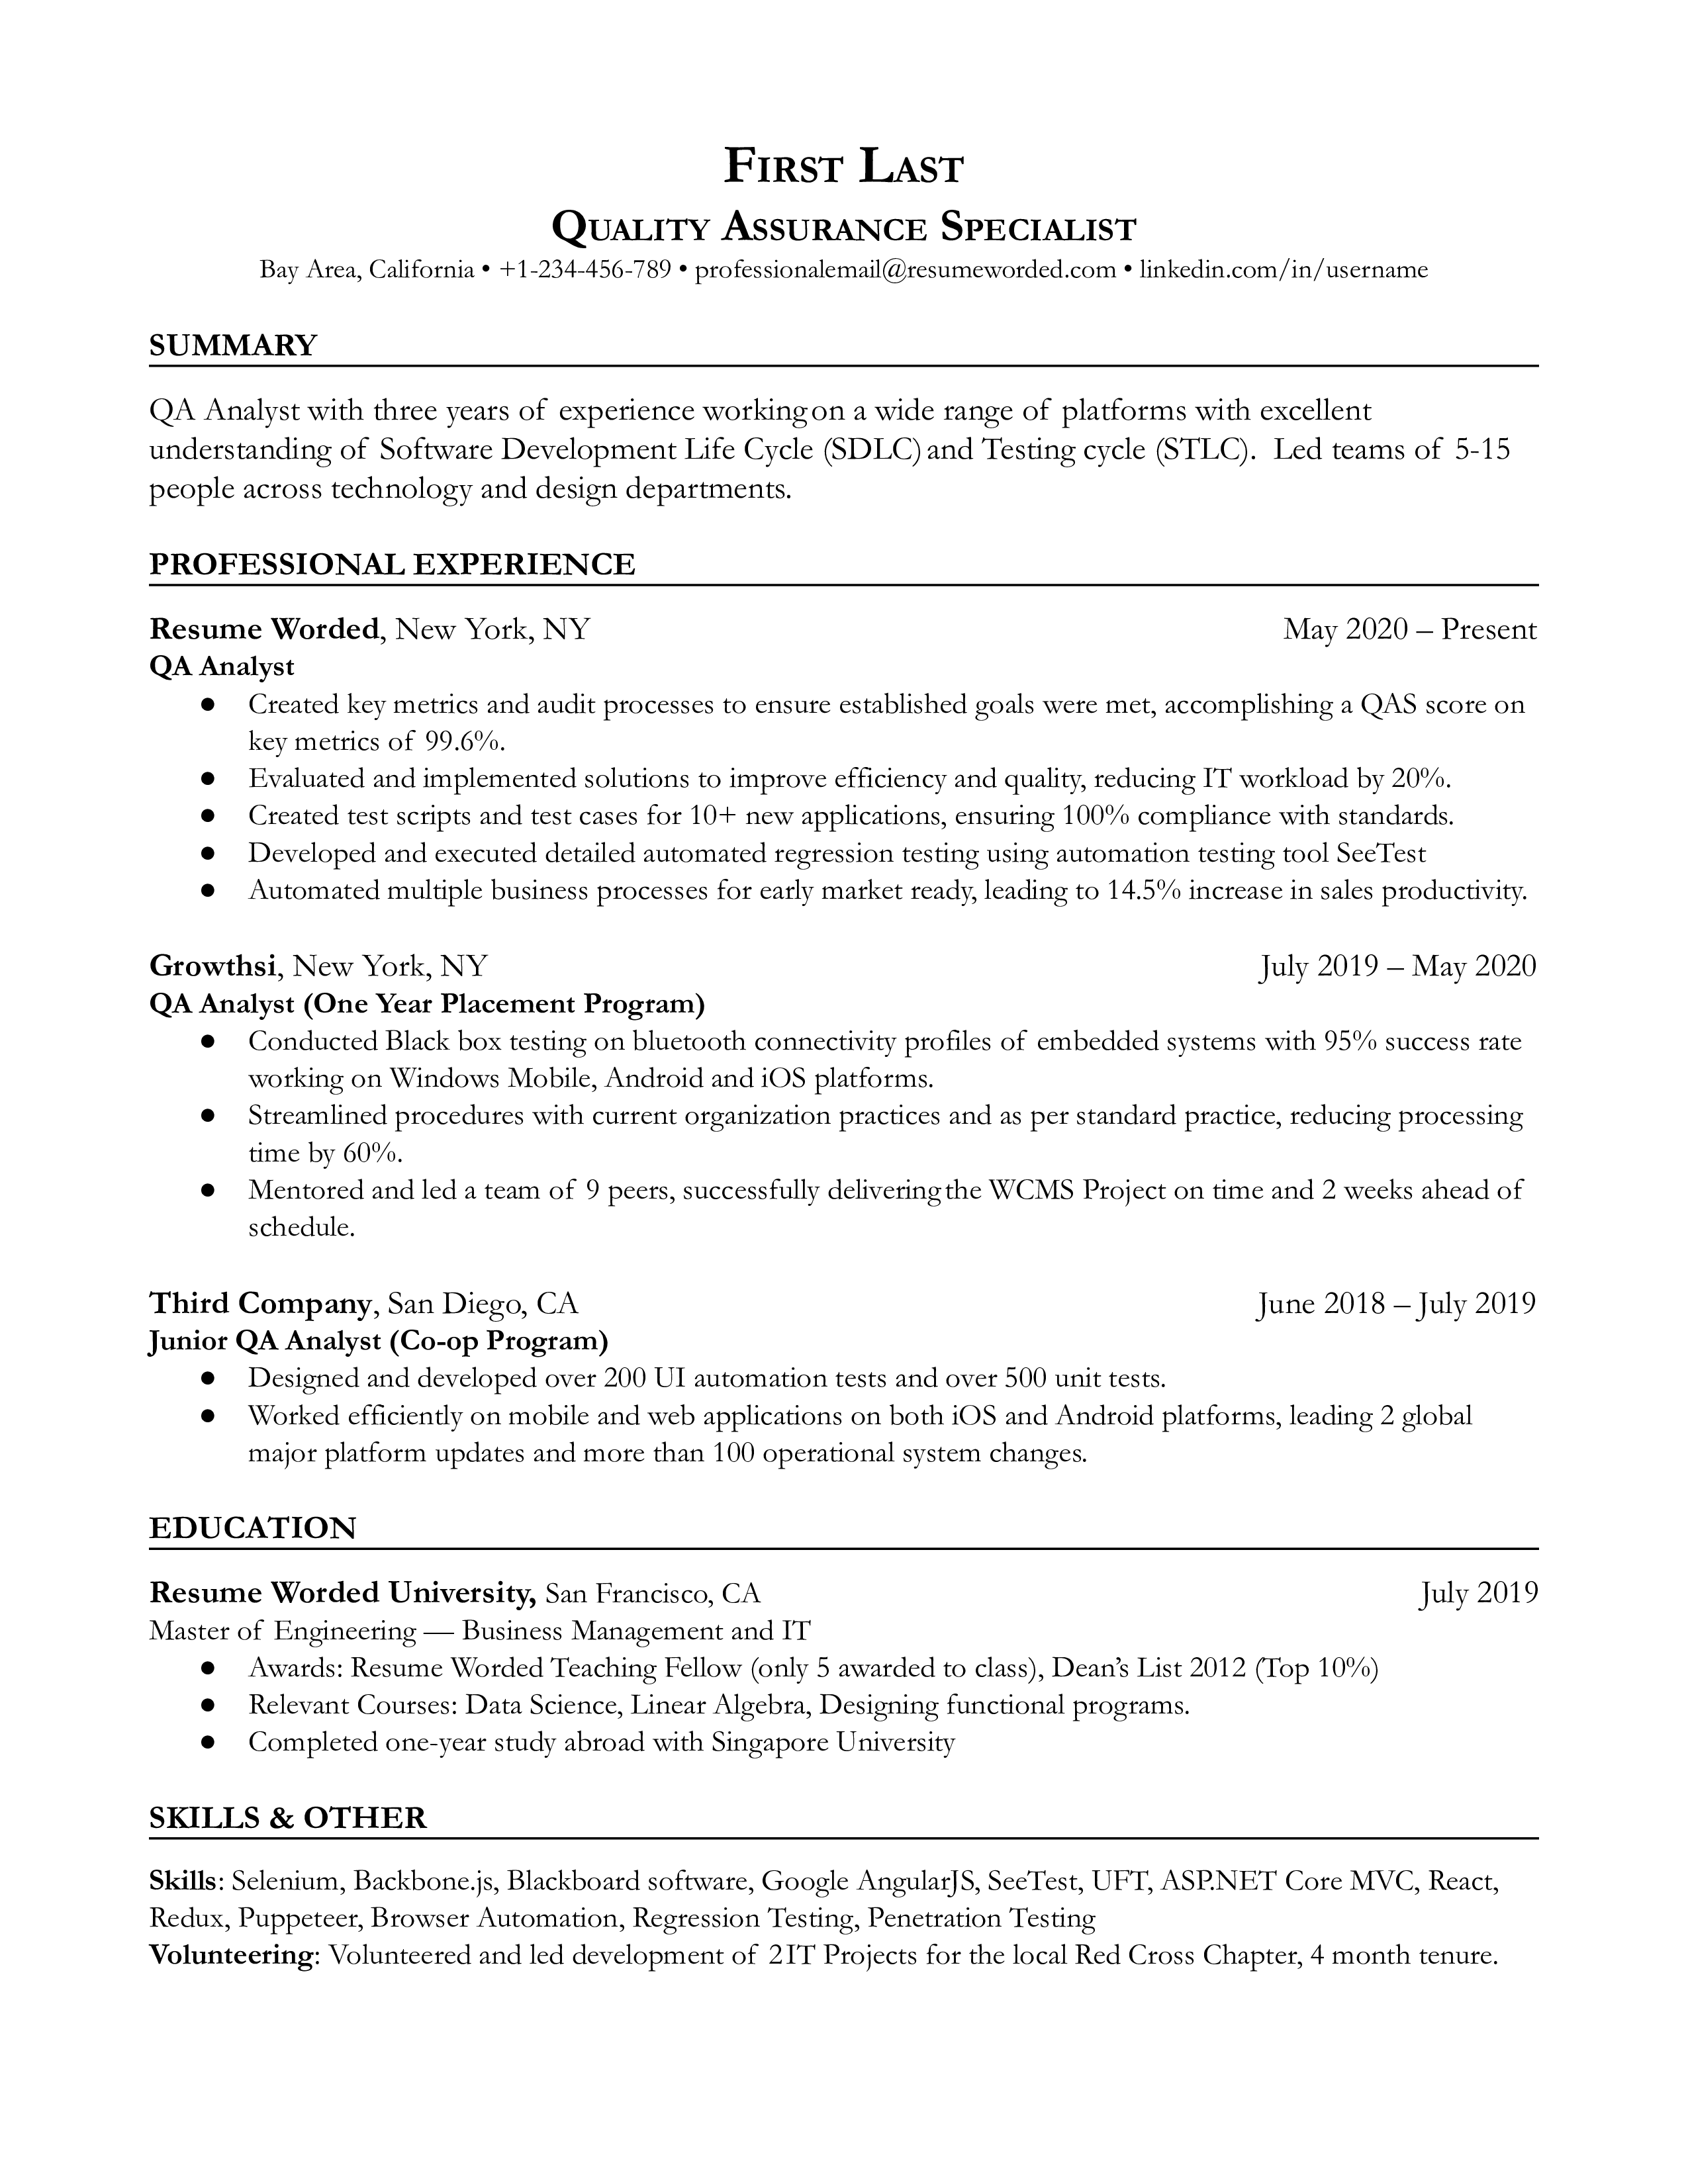 QA (Quality Assurance) Analyst/Specialist Resume Template + Example